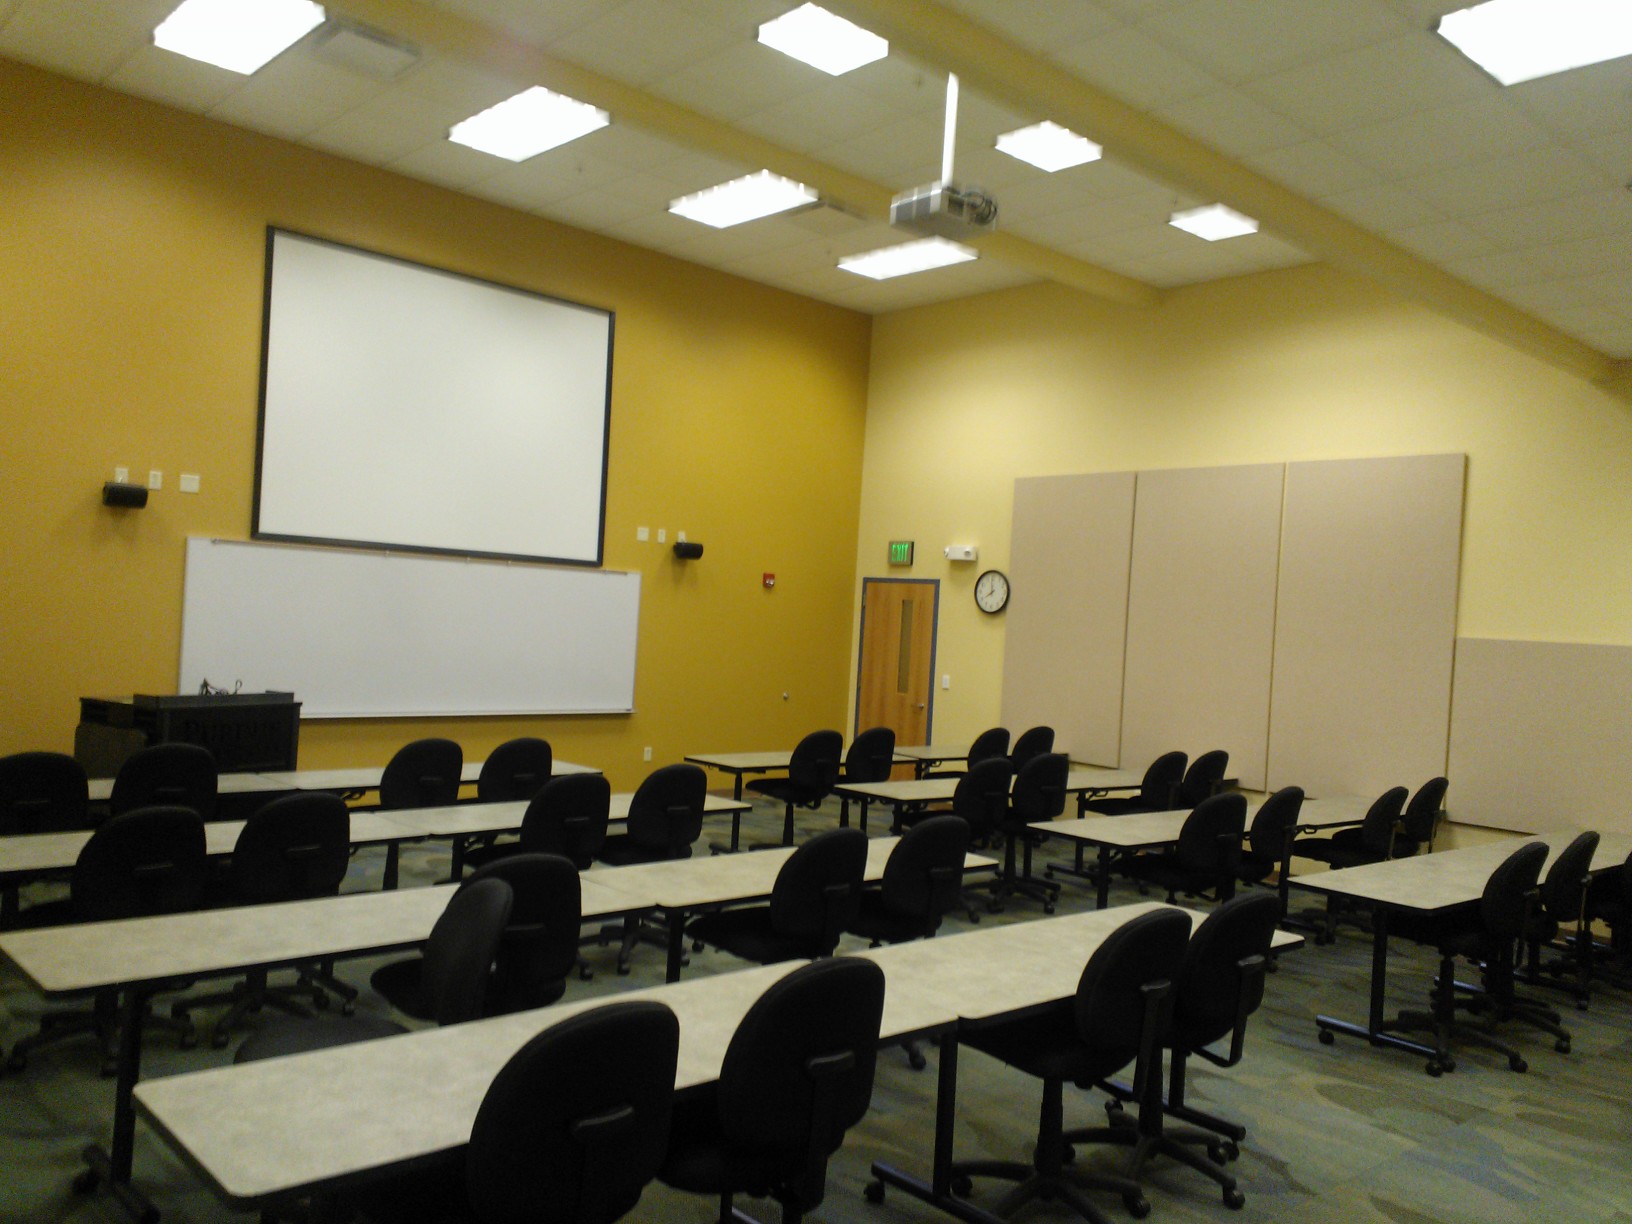 Room 141 set up in classroom style seating for 36 guests. Chairs are cushioned and on wheels. Big screen and white board on the wall for presentations.